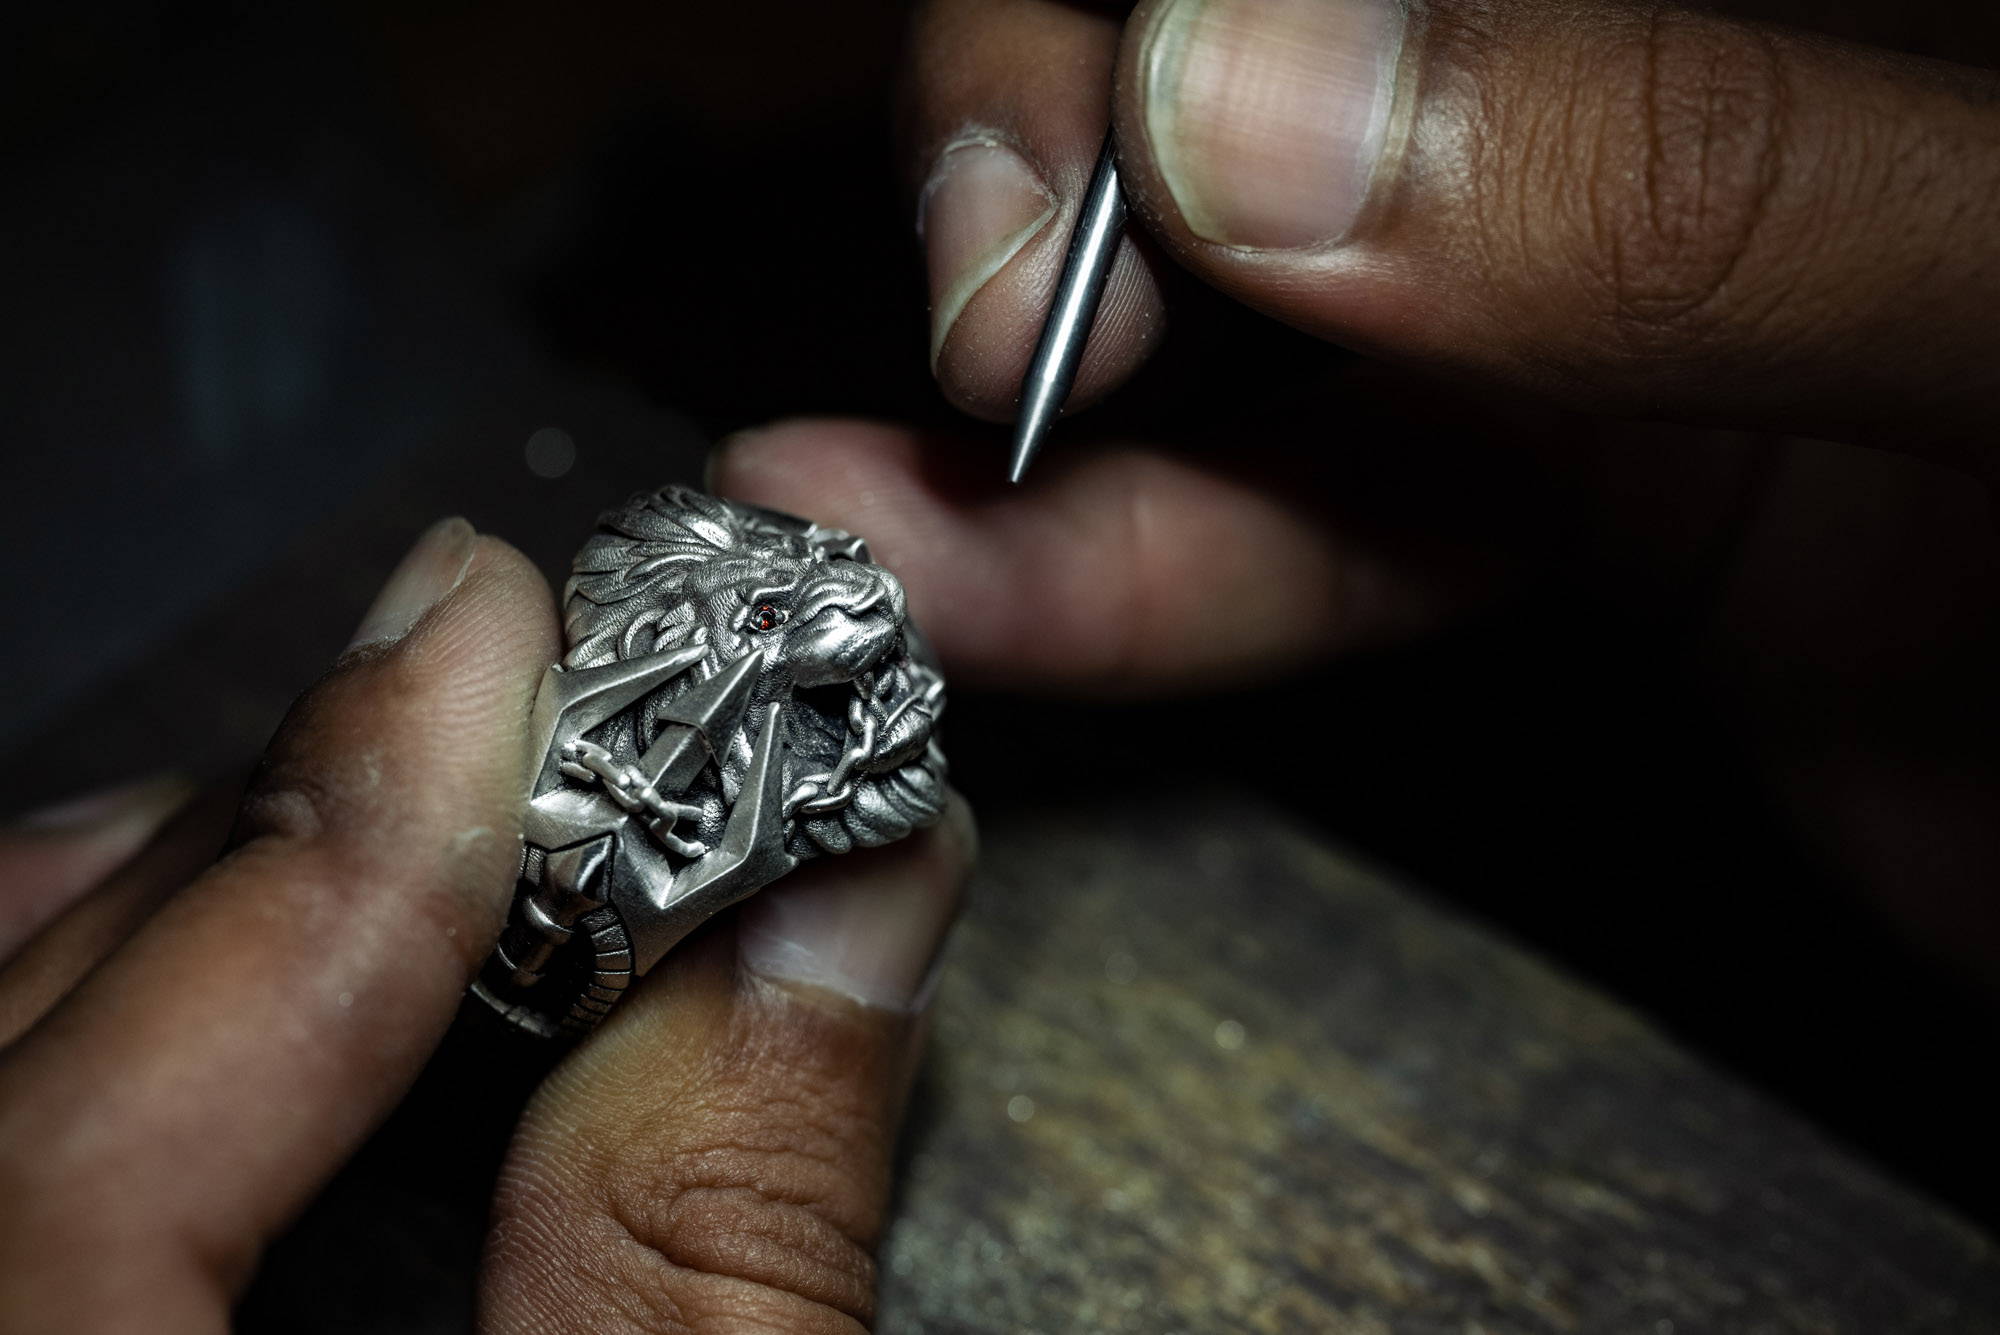 A NightRider Master Jewelry handcrafting a Rudiarius Band